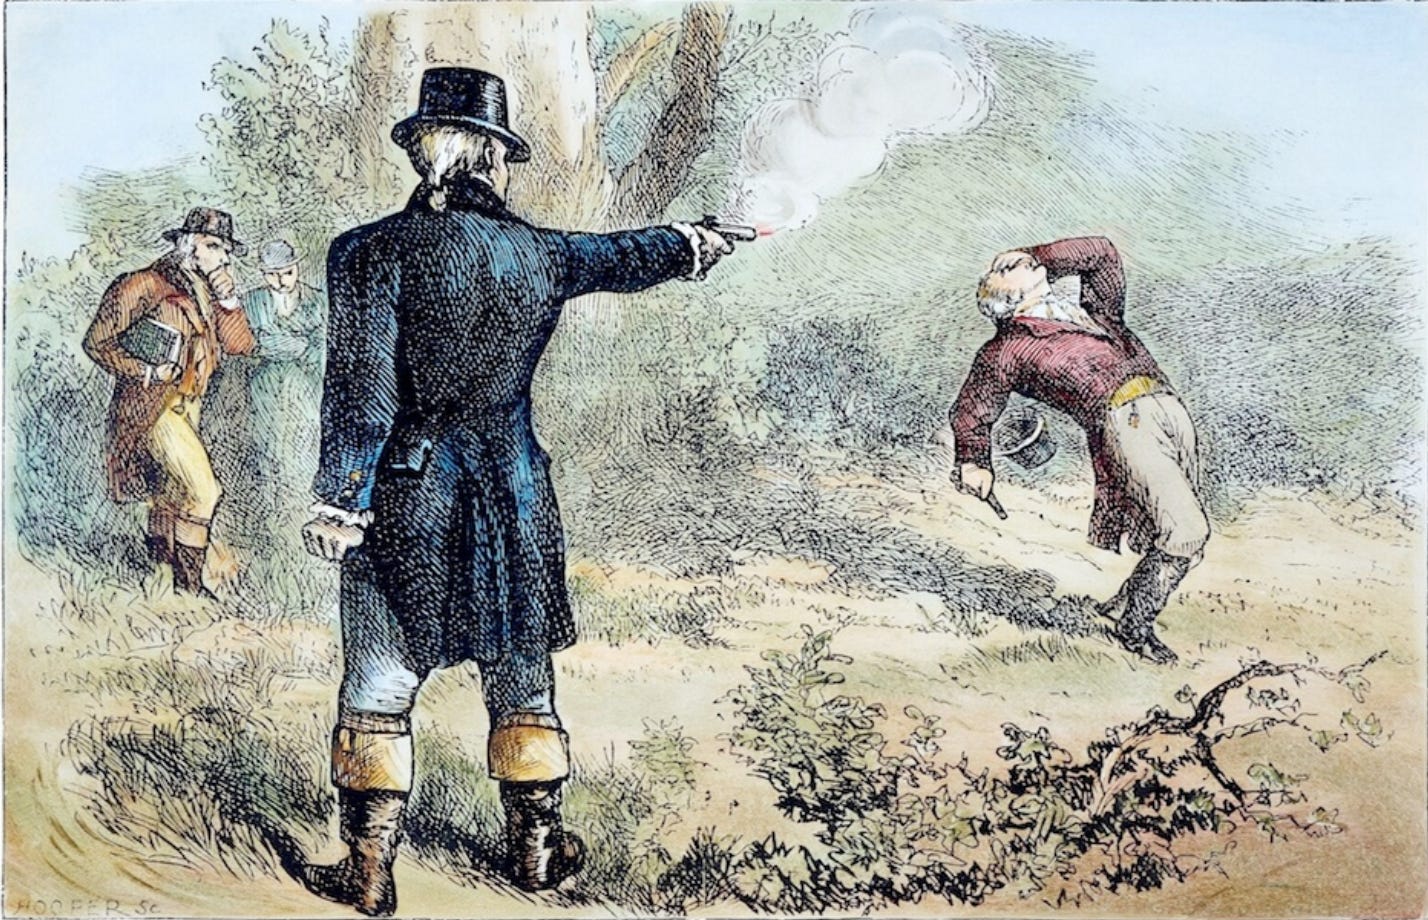 A dramatically imaginative (if inaccurate) 19thc illustration of the duel between Hamilton &amp; Burr.